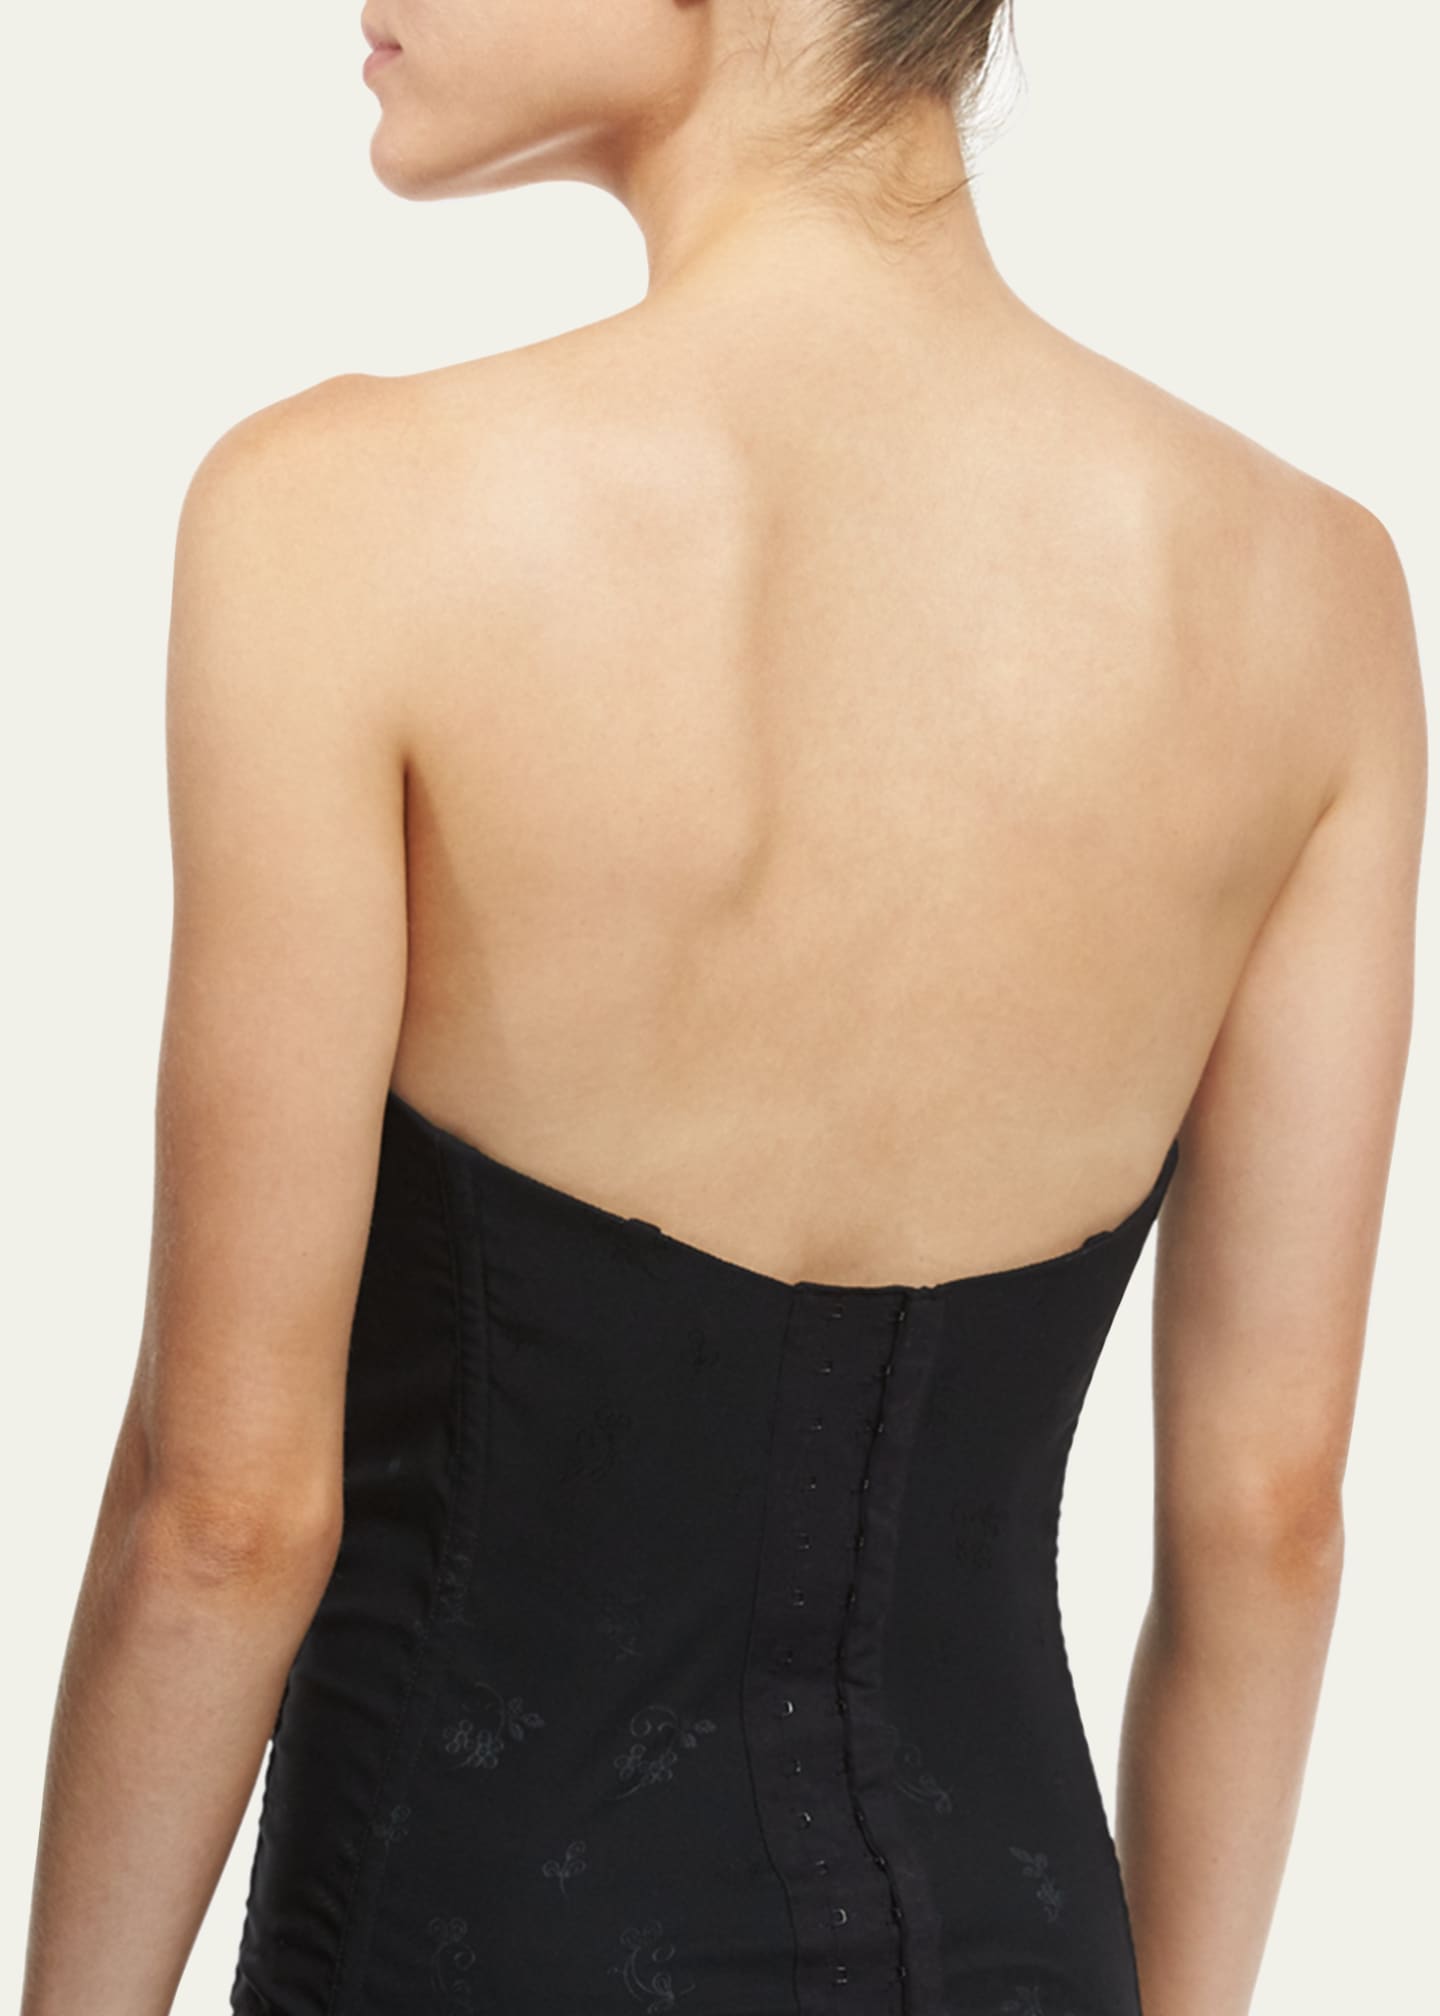 Simone Perele Wish Smooth-Cup Plunge Bustier Image 3 of 5